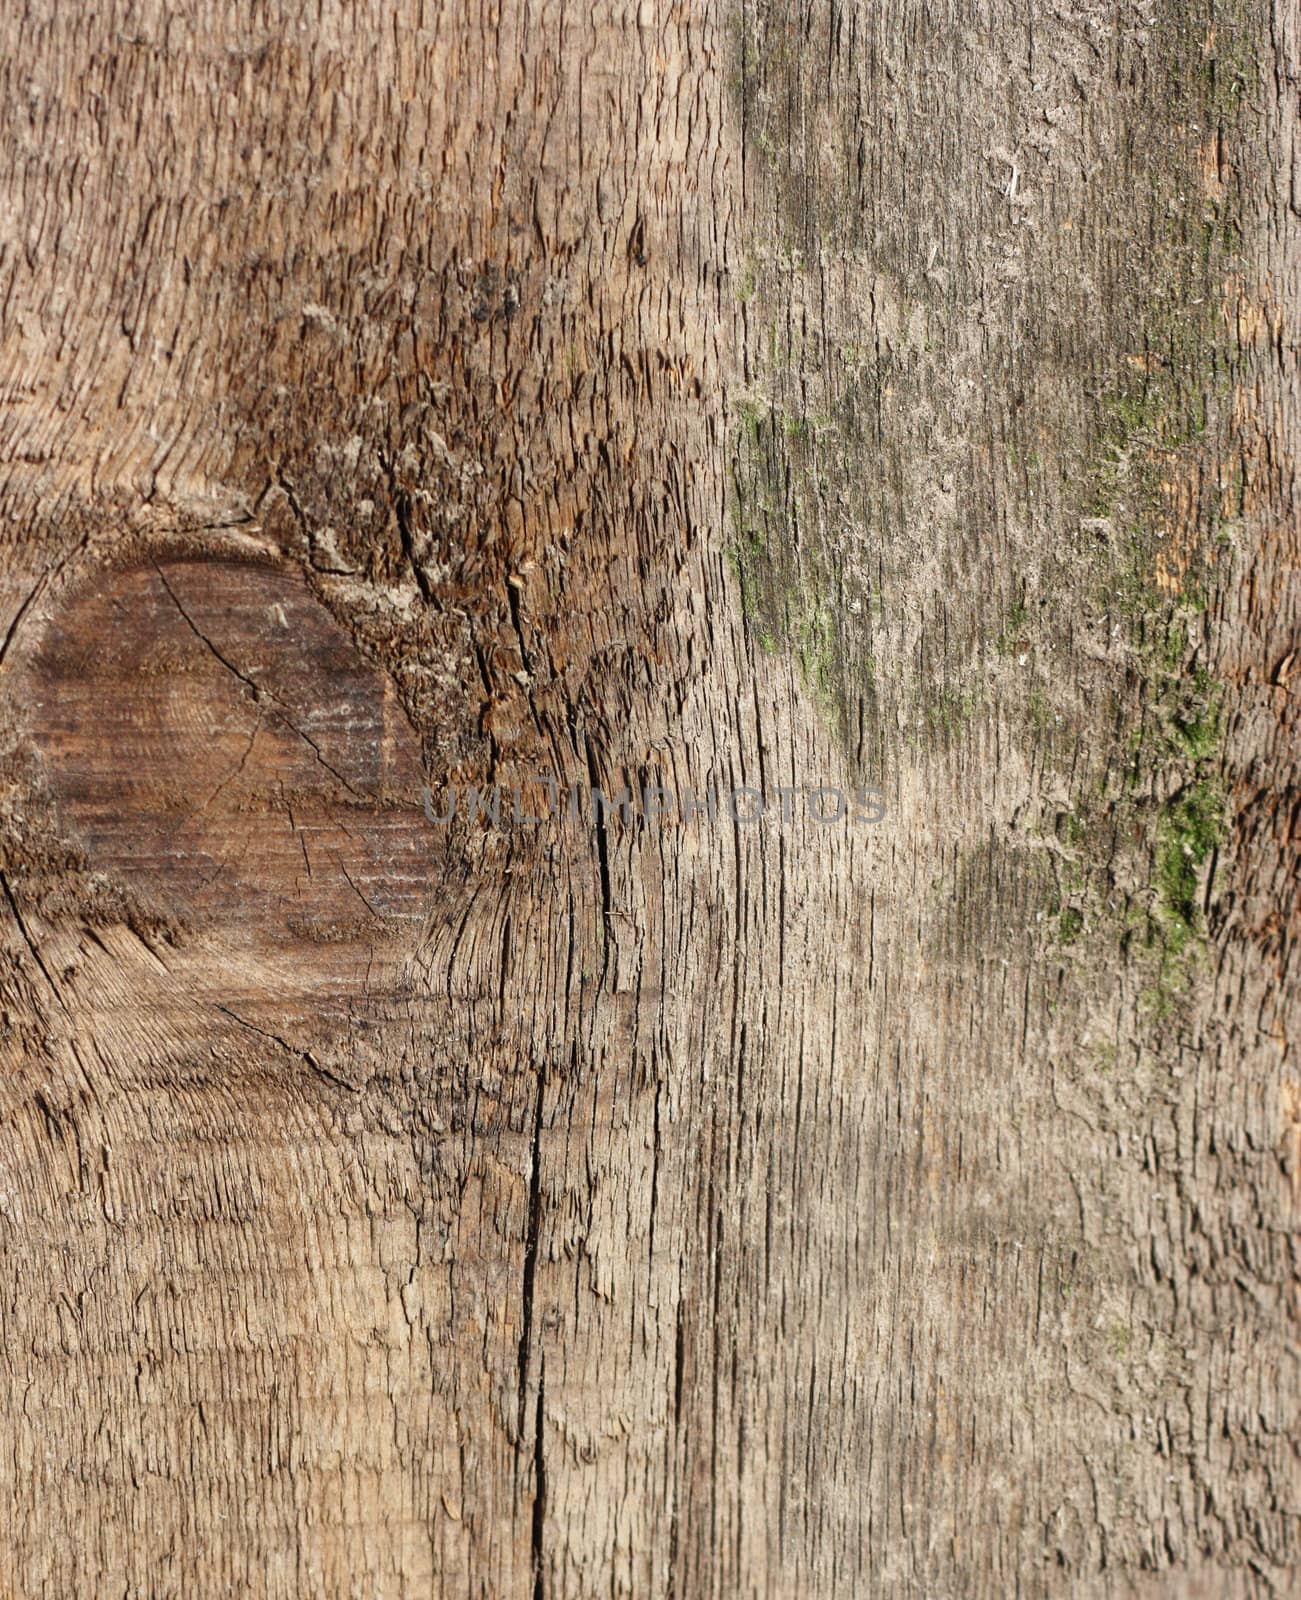 Wooden texture - can be used as a background 